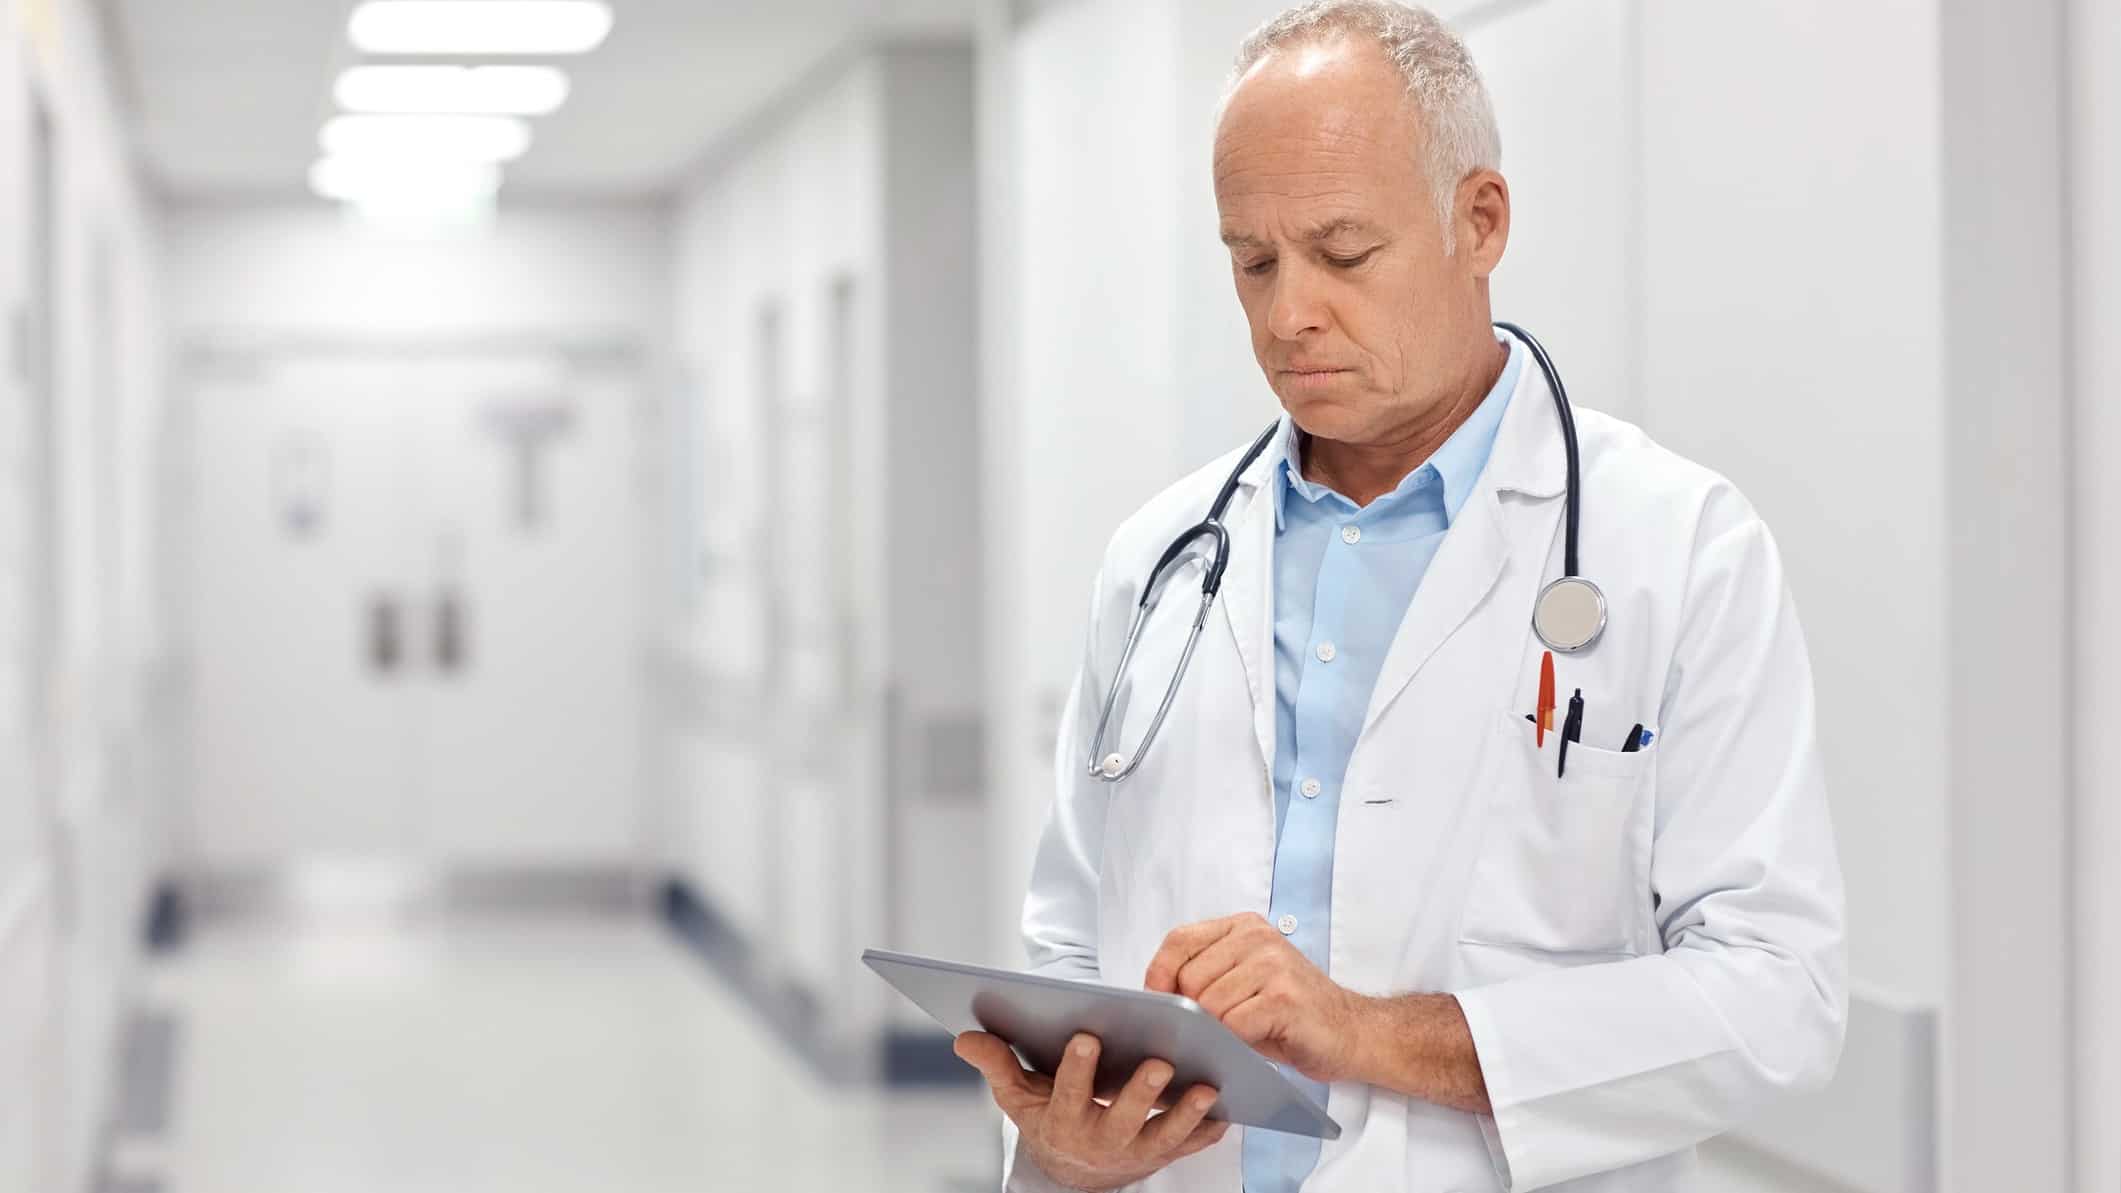 a doctor in a white coat with a stethoscope around his neck stands in the hallway of a hospital deep in concentration over a tablet device in his hands.